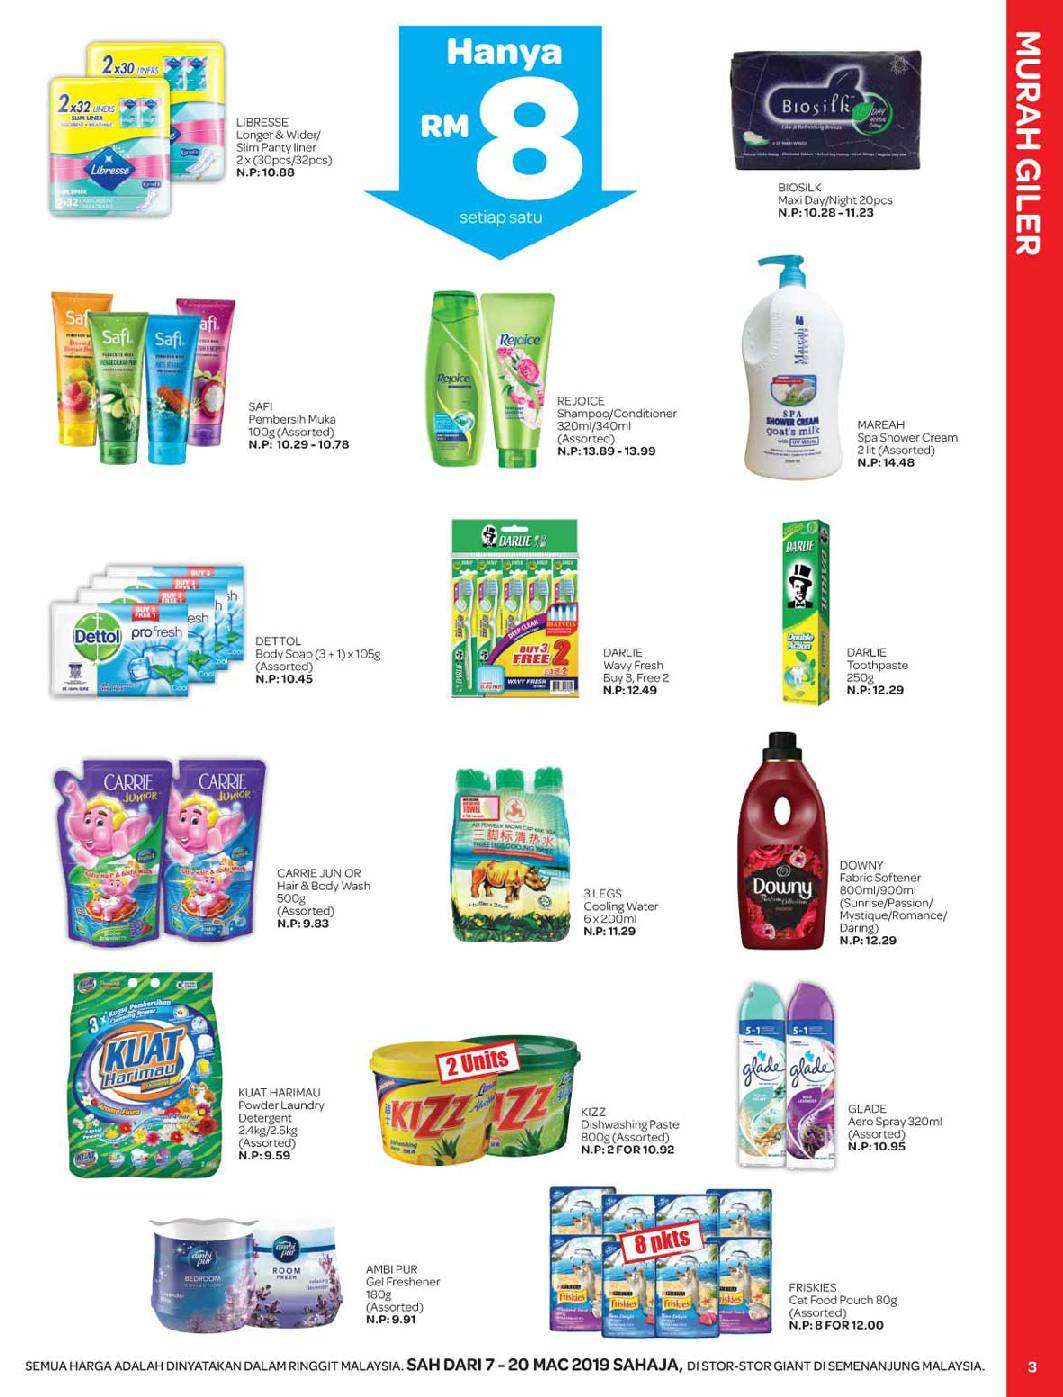 Giant Catalogue (7 March 2019 - 20 March 2019)